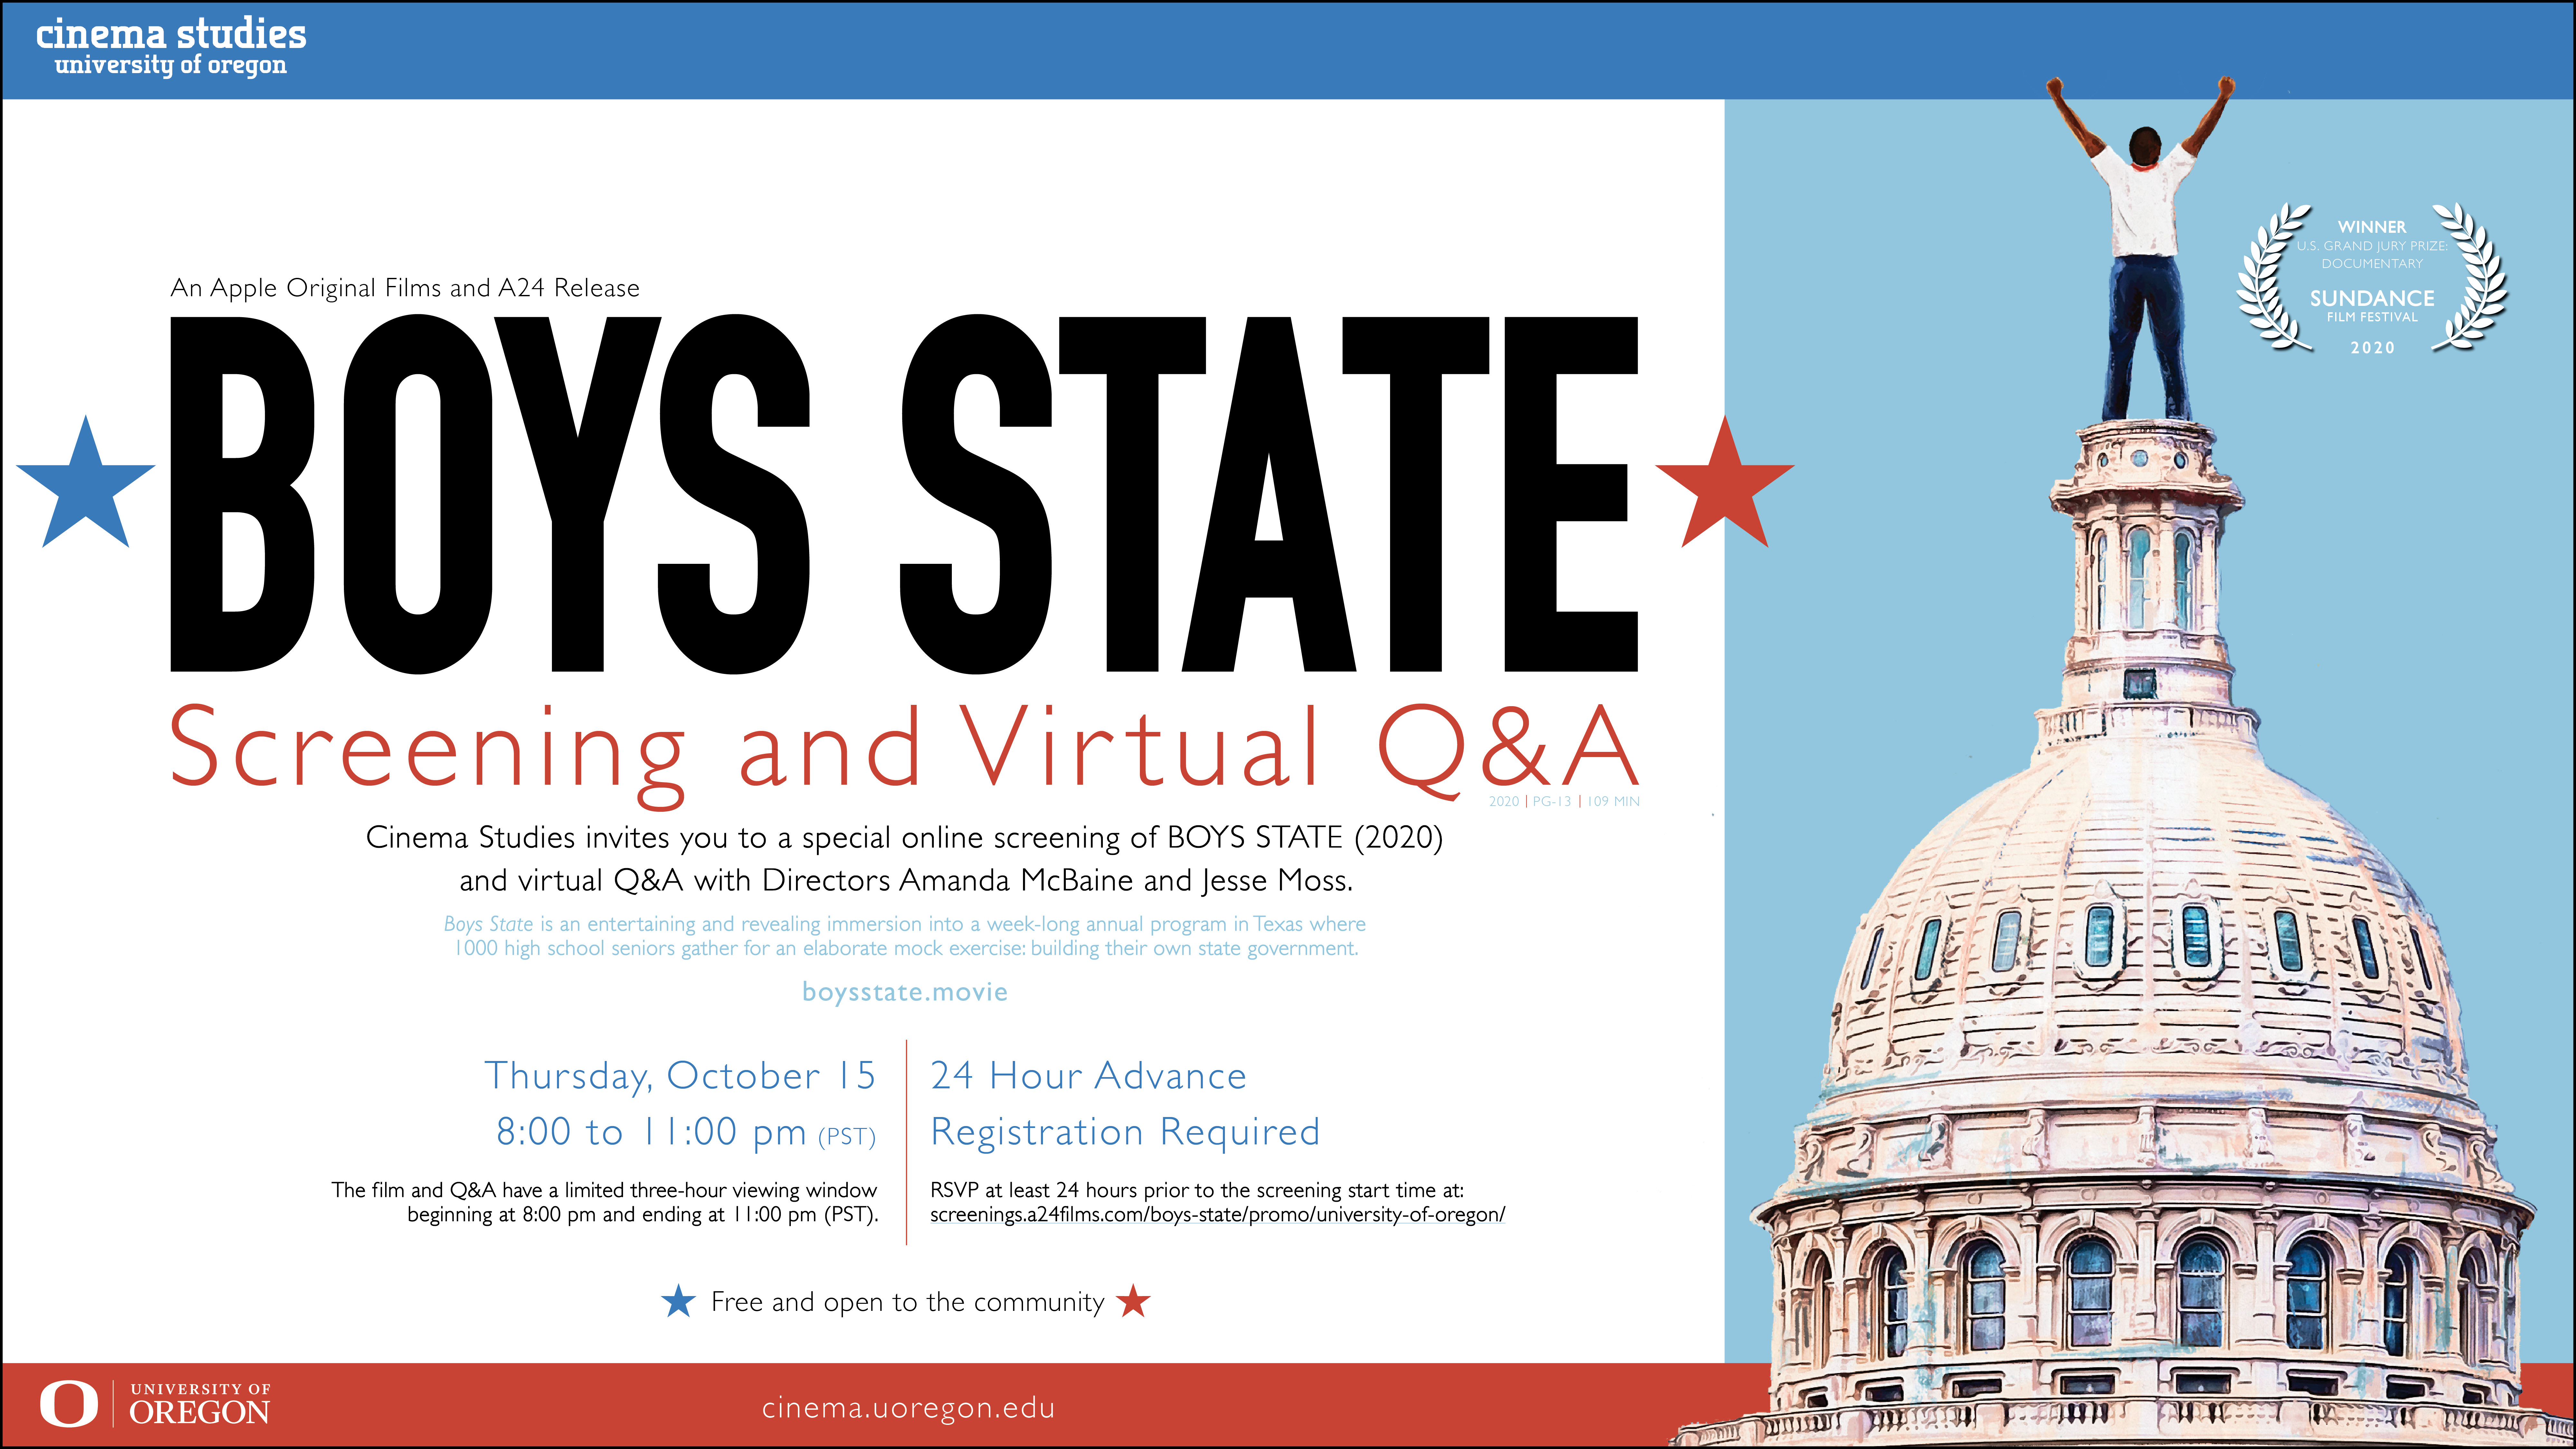 Boys State Screening and Virtual Q&A